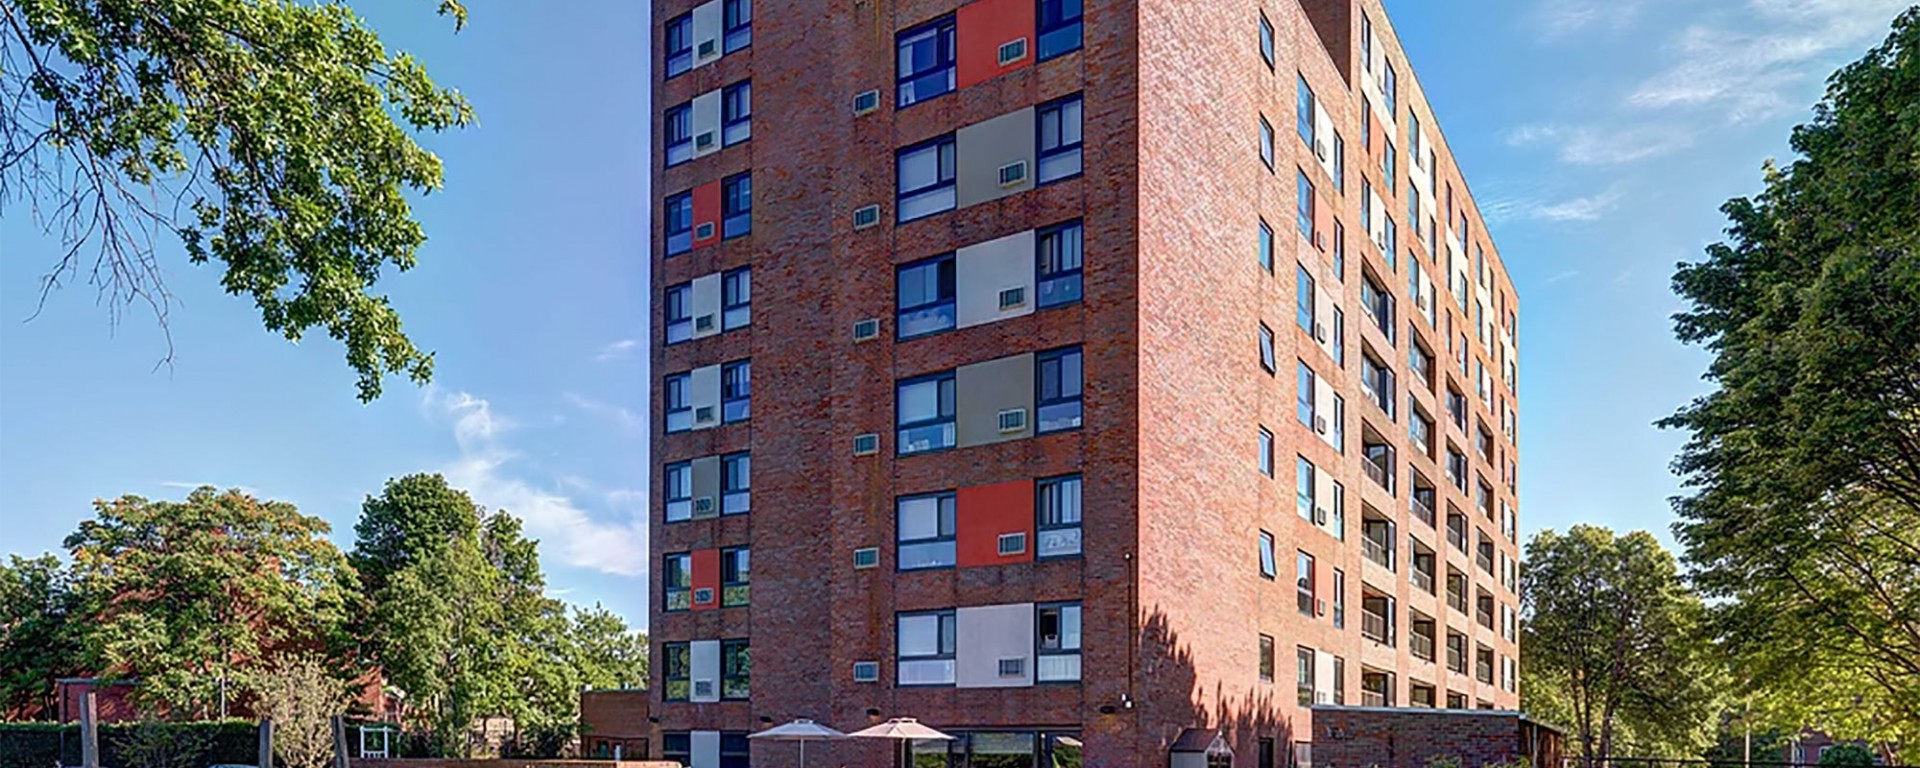 St. Stephen’s Towers Apartments in Lynn